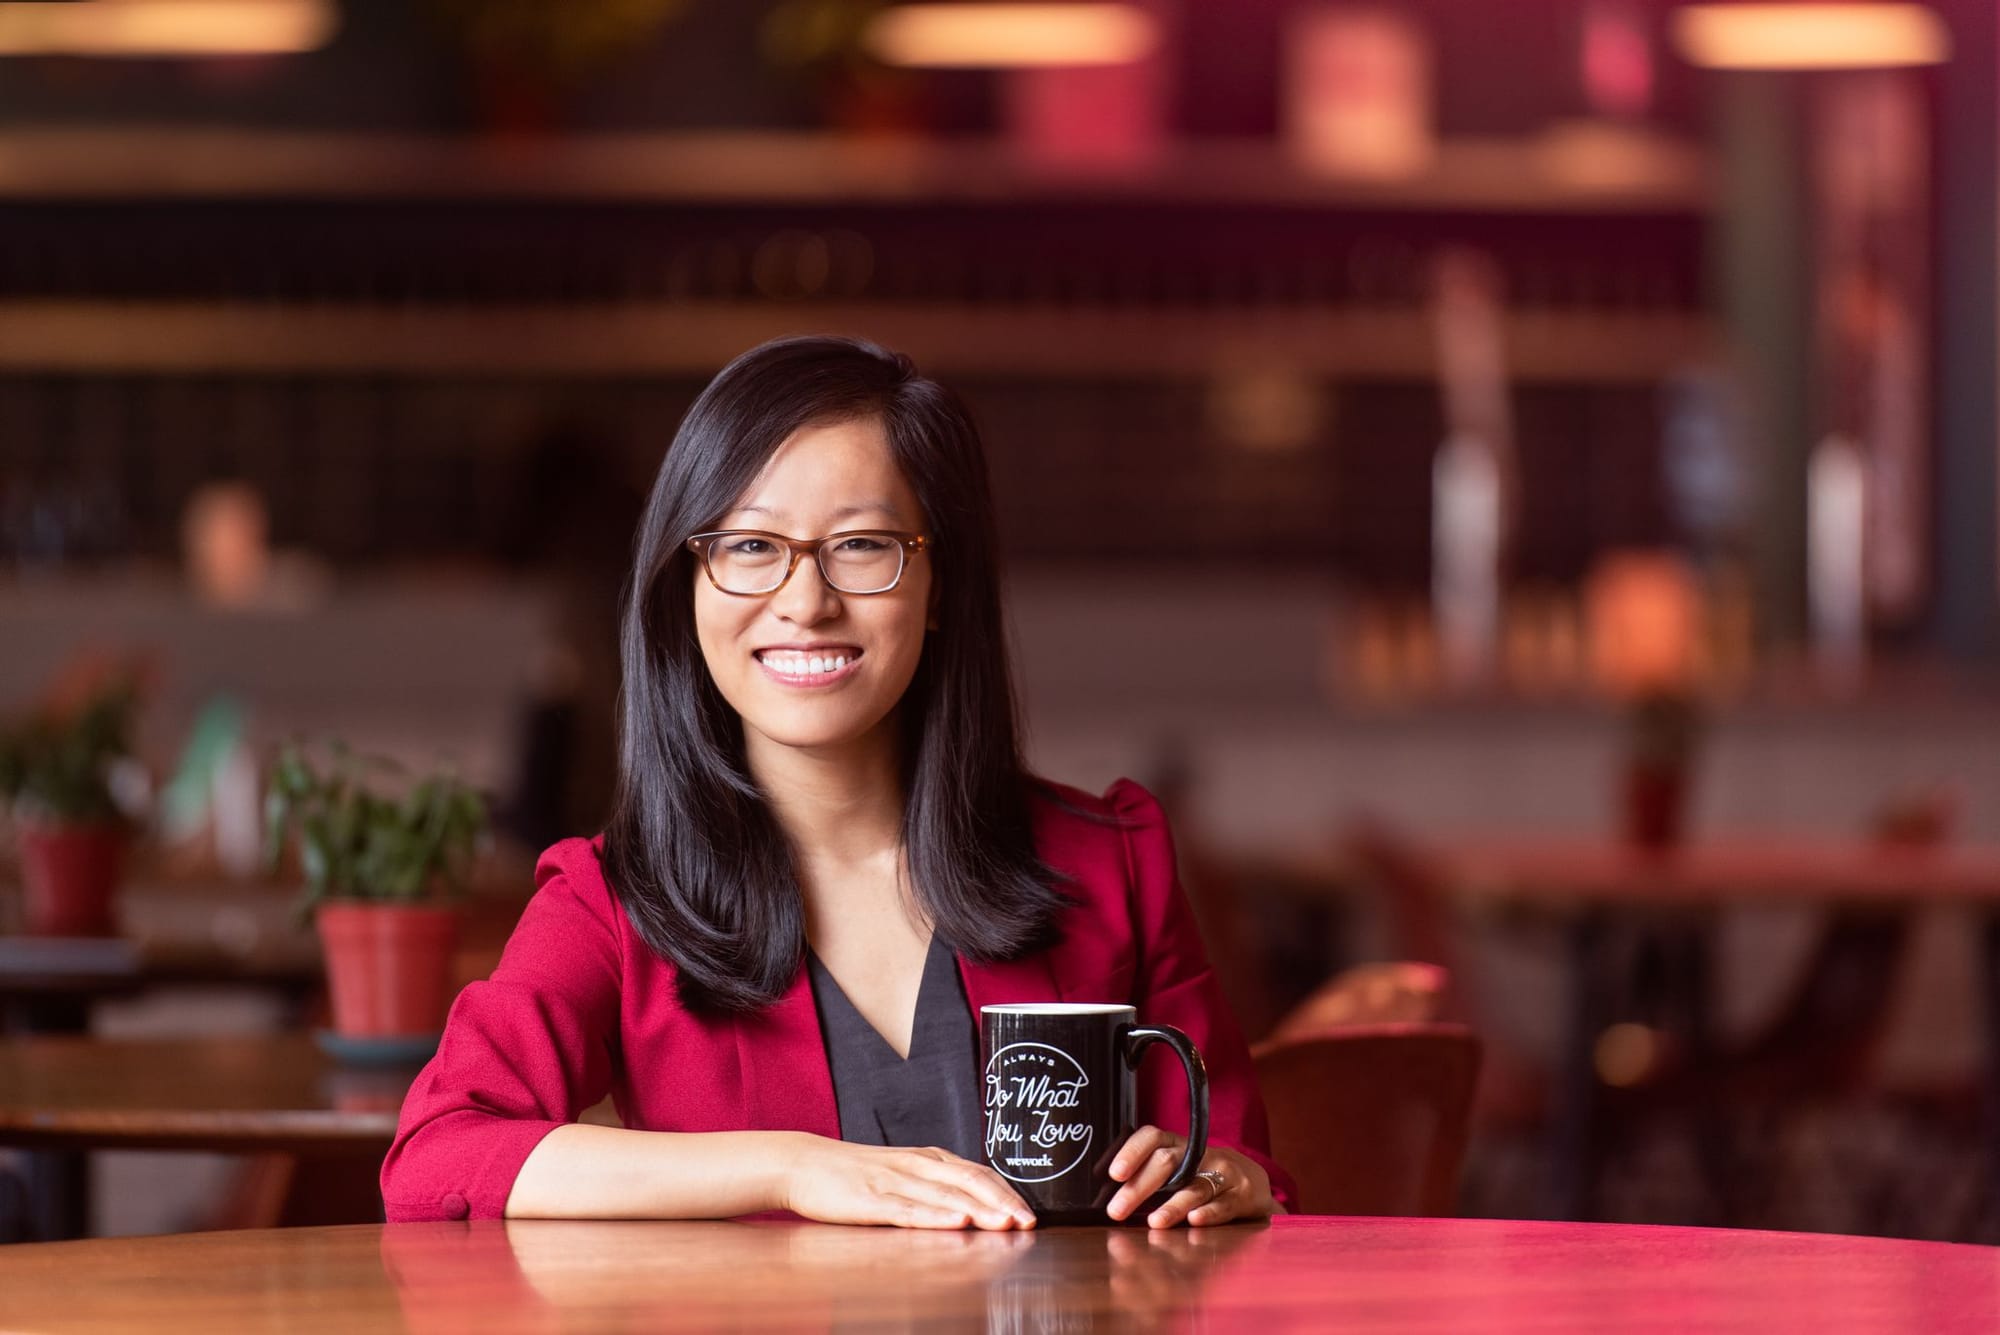 Jiaona Zhang ("JZ"), Director of Product Management at WeWork.